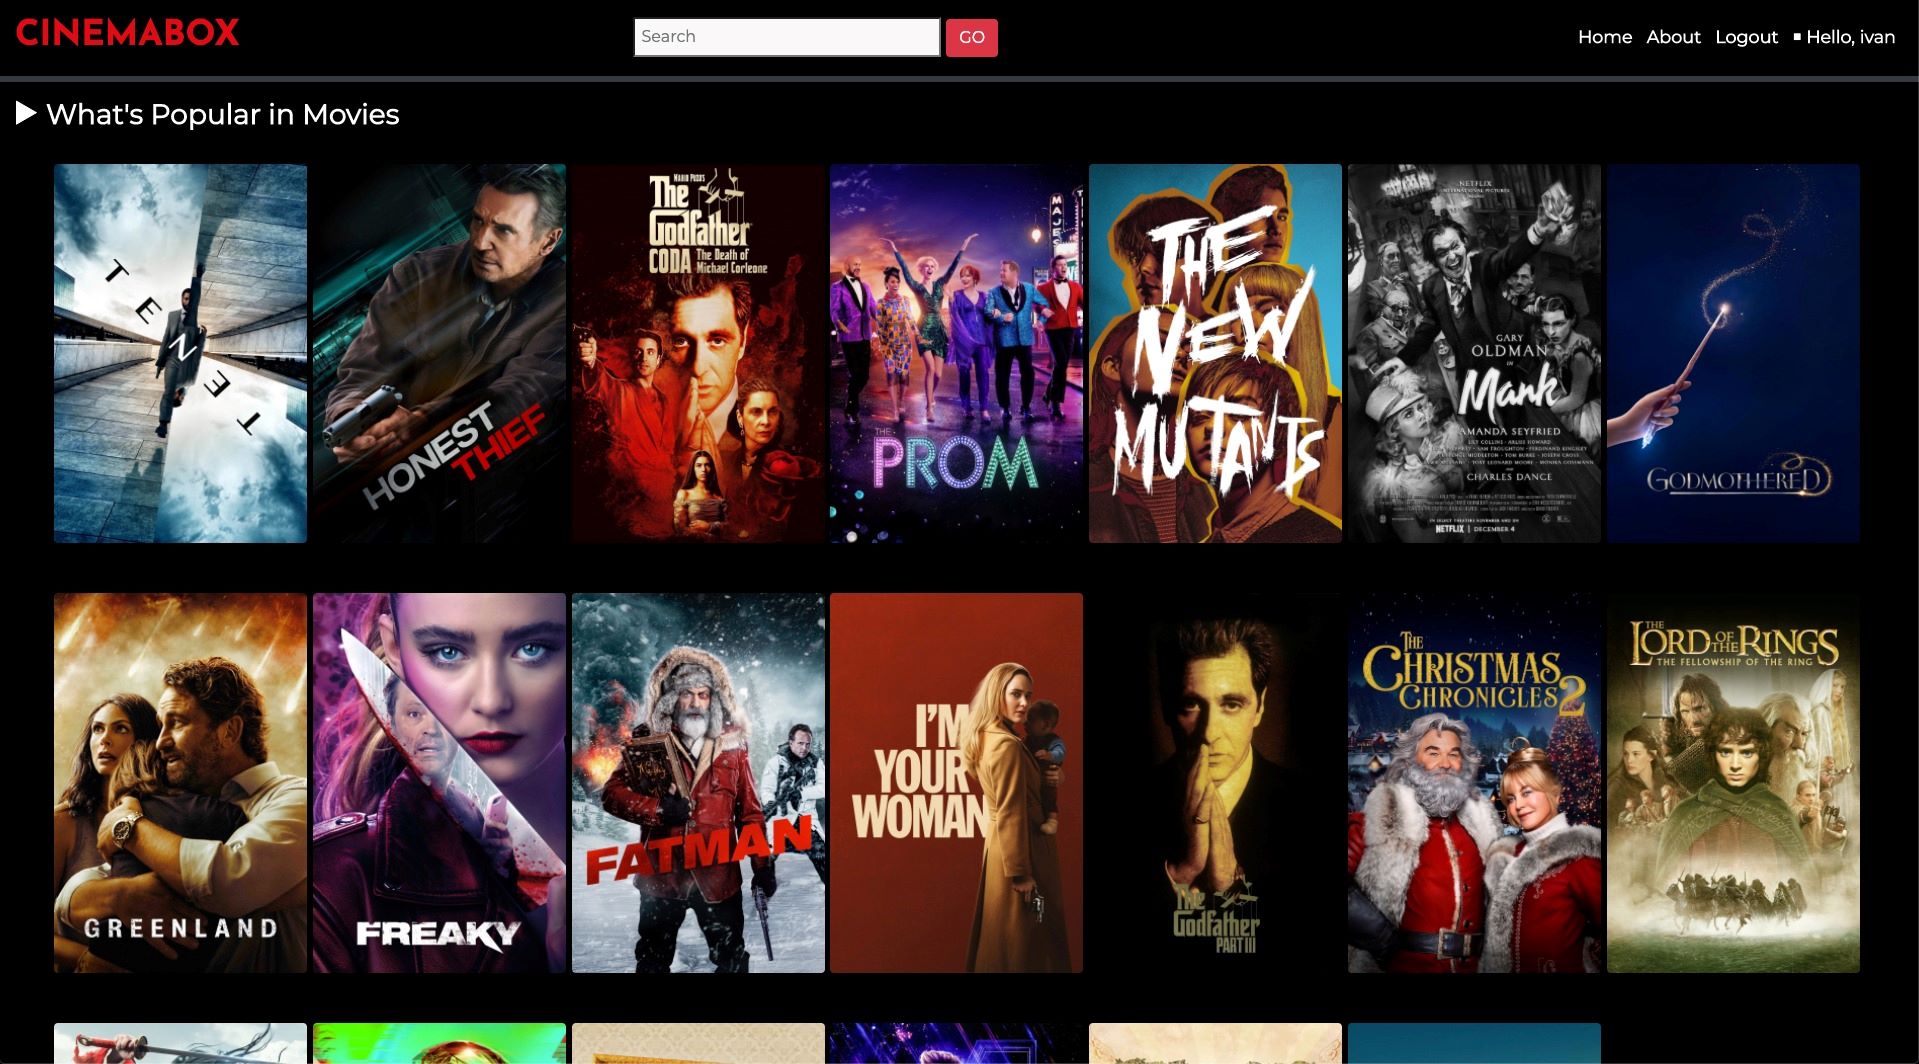 How To Download Movies From Cinemabox